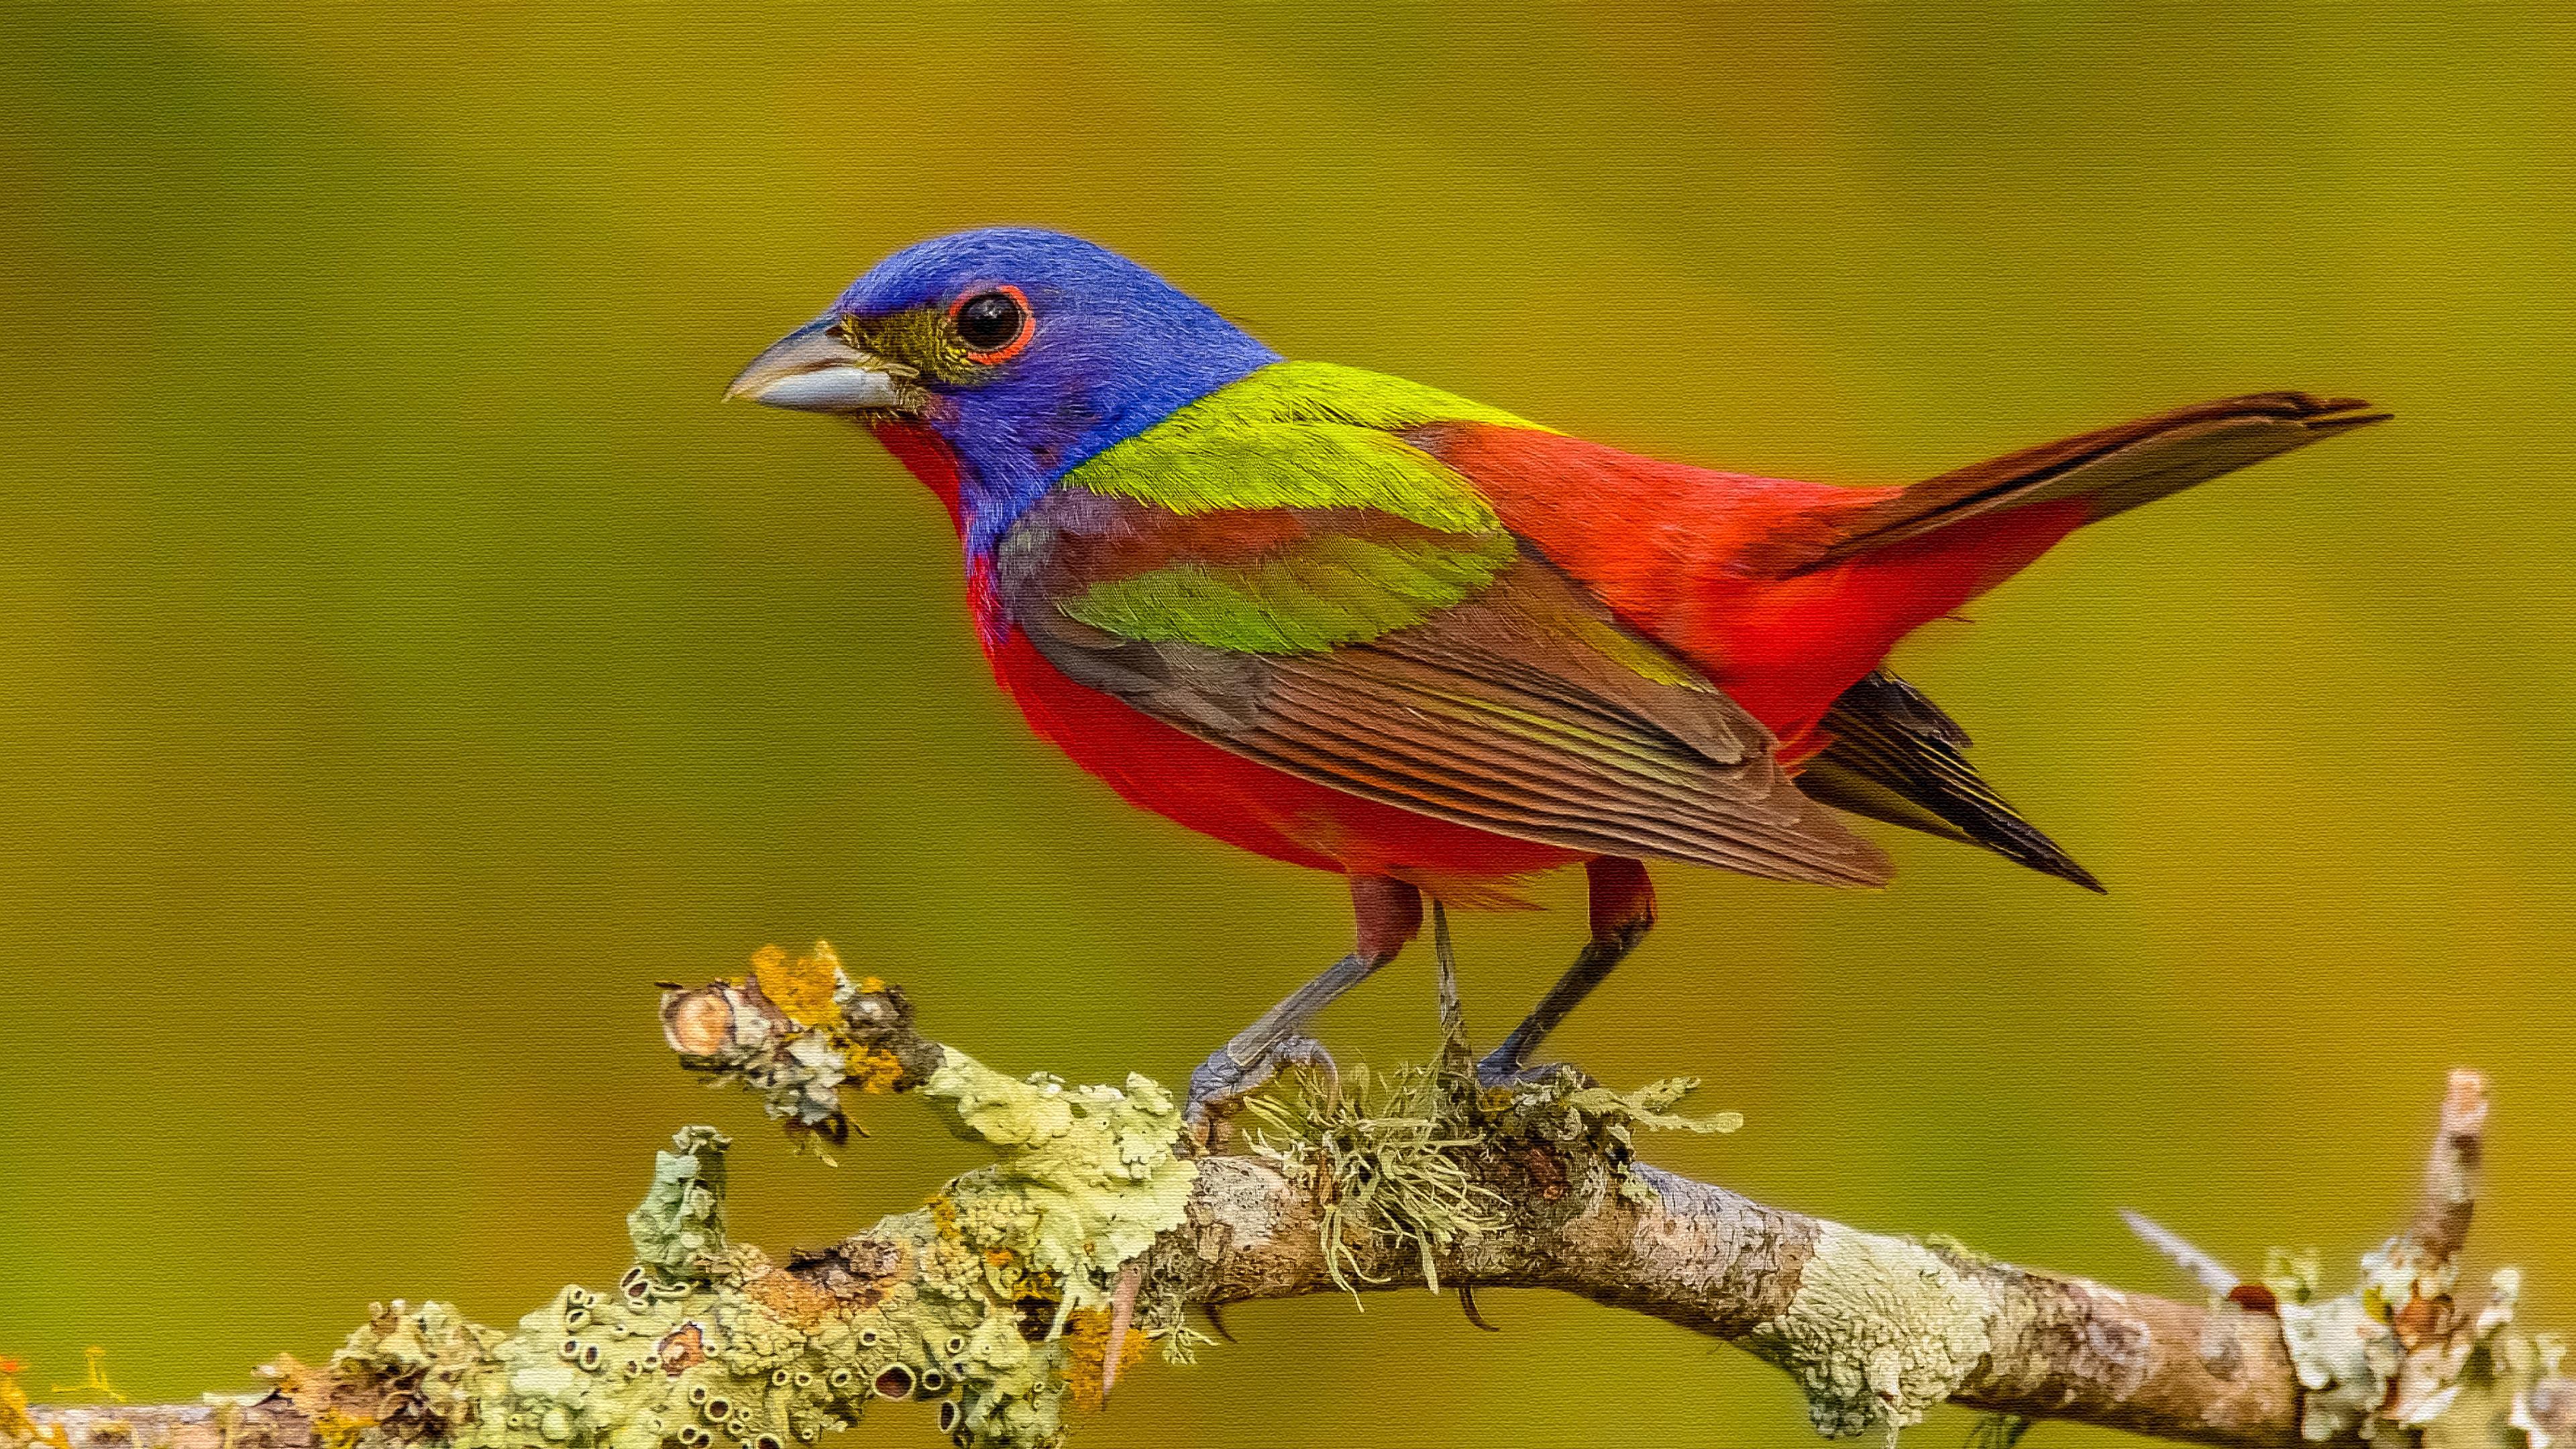 Painted Bunting on Canvas 4k Ultra HD Wallpaper